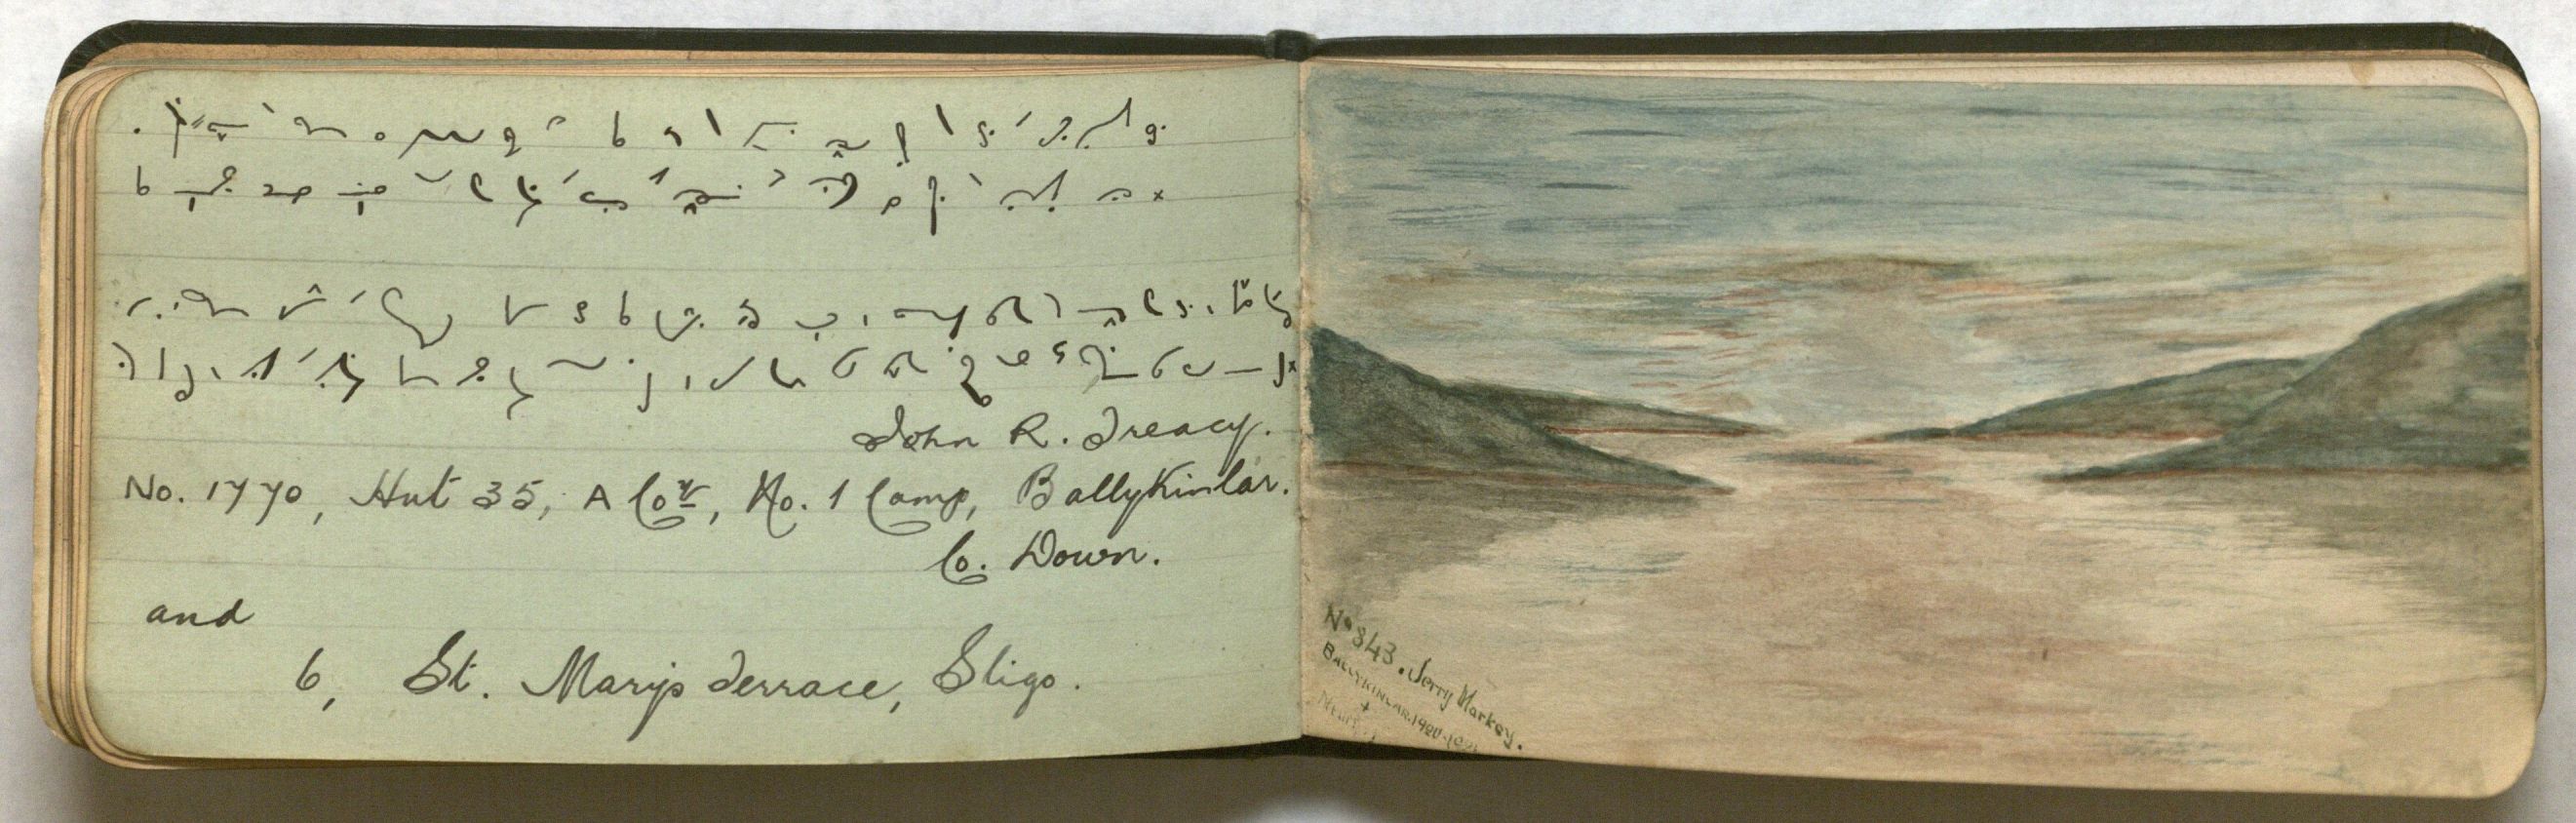 Photograph of an opening featuring an inscription in shorthand and a sketch. 